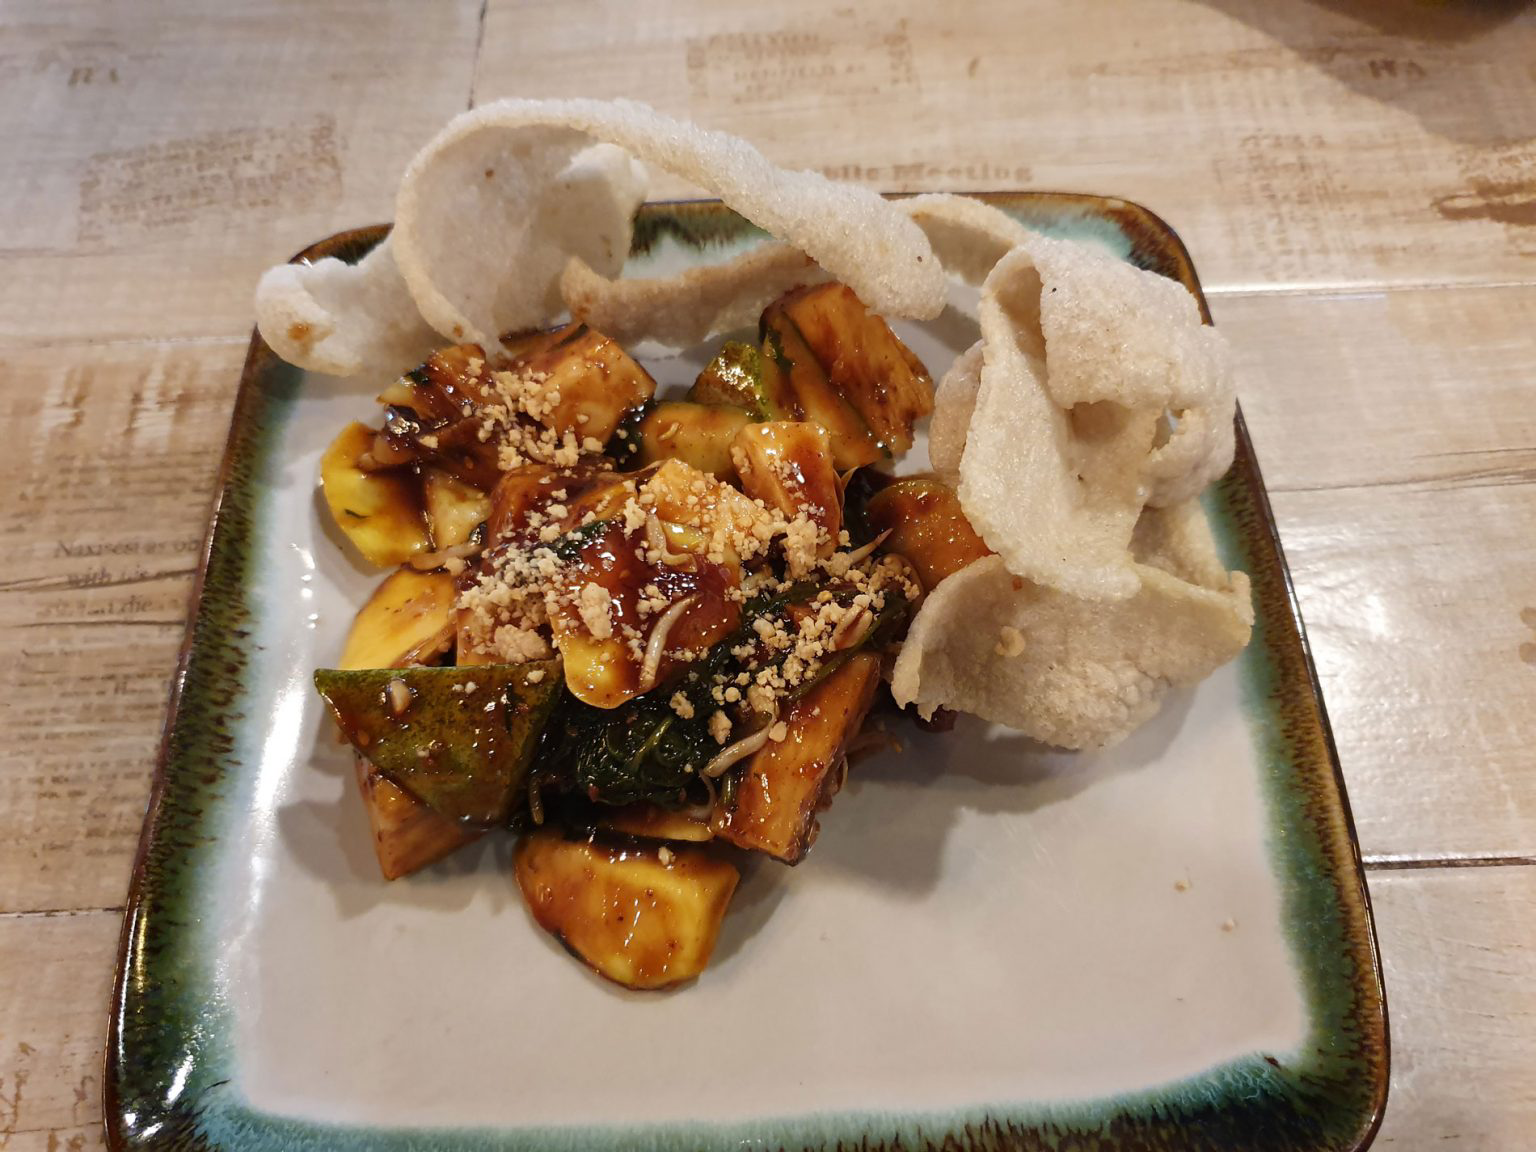 A square, ornate dish filled with vegetable rojak.